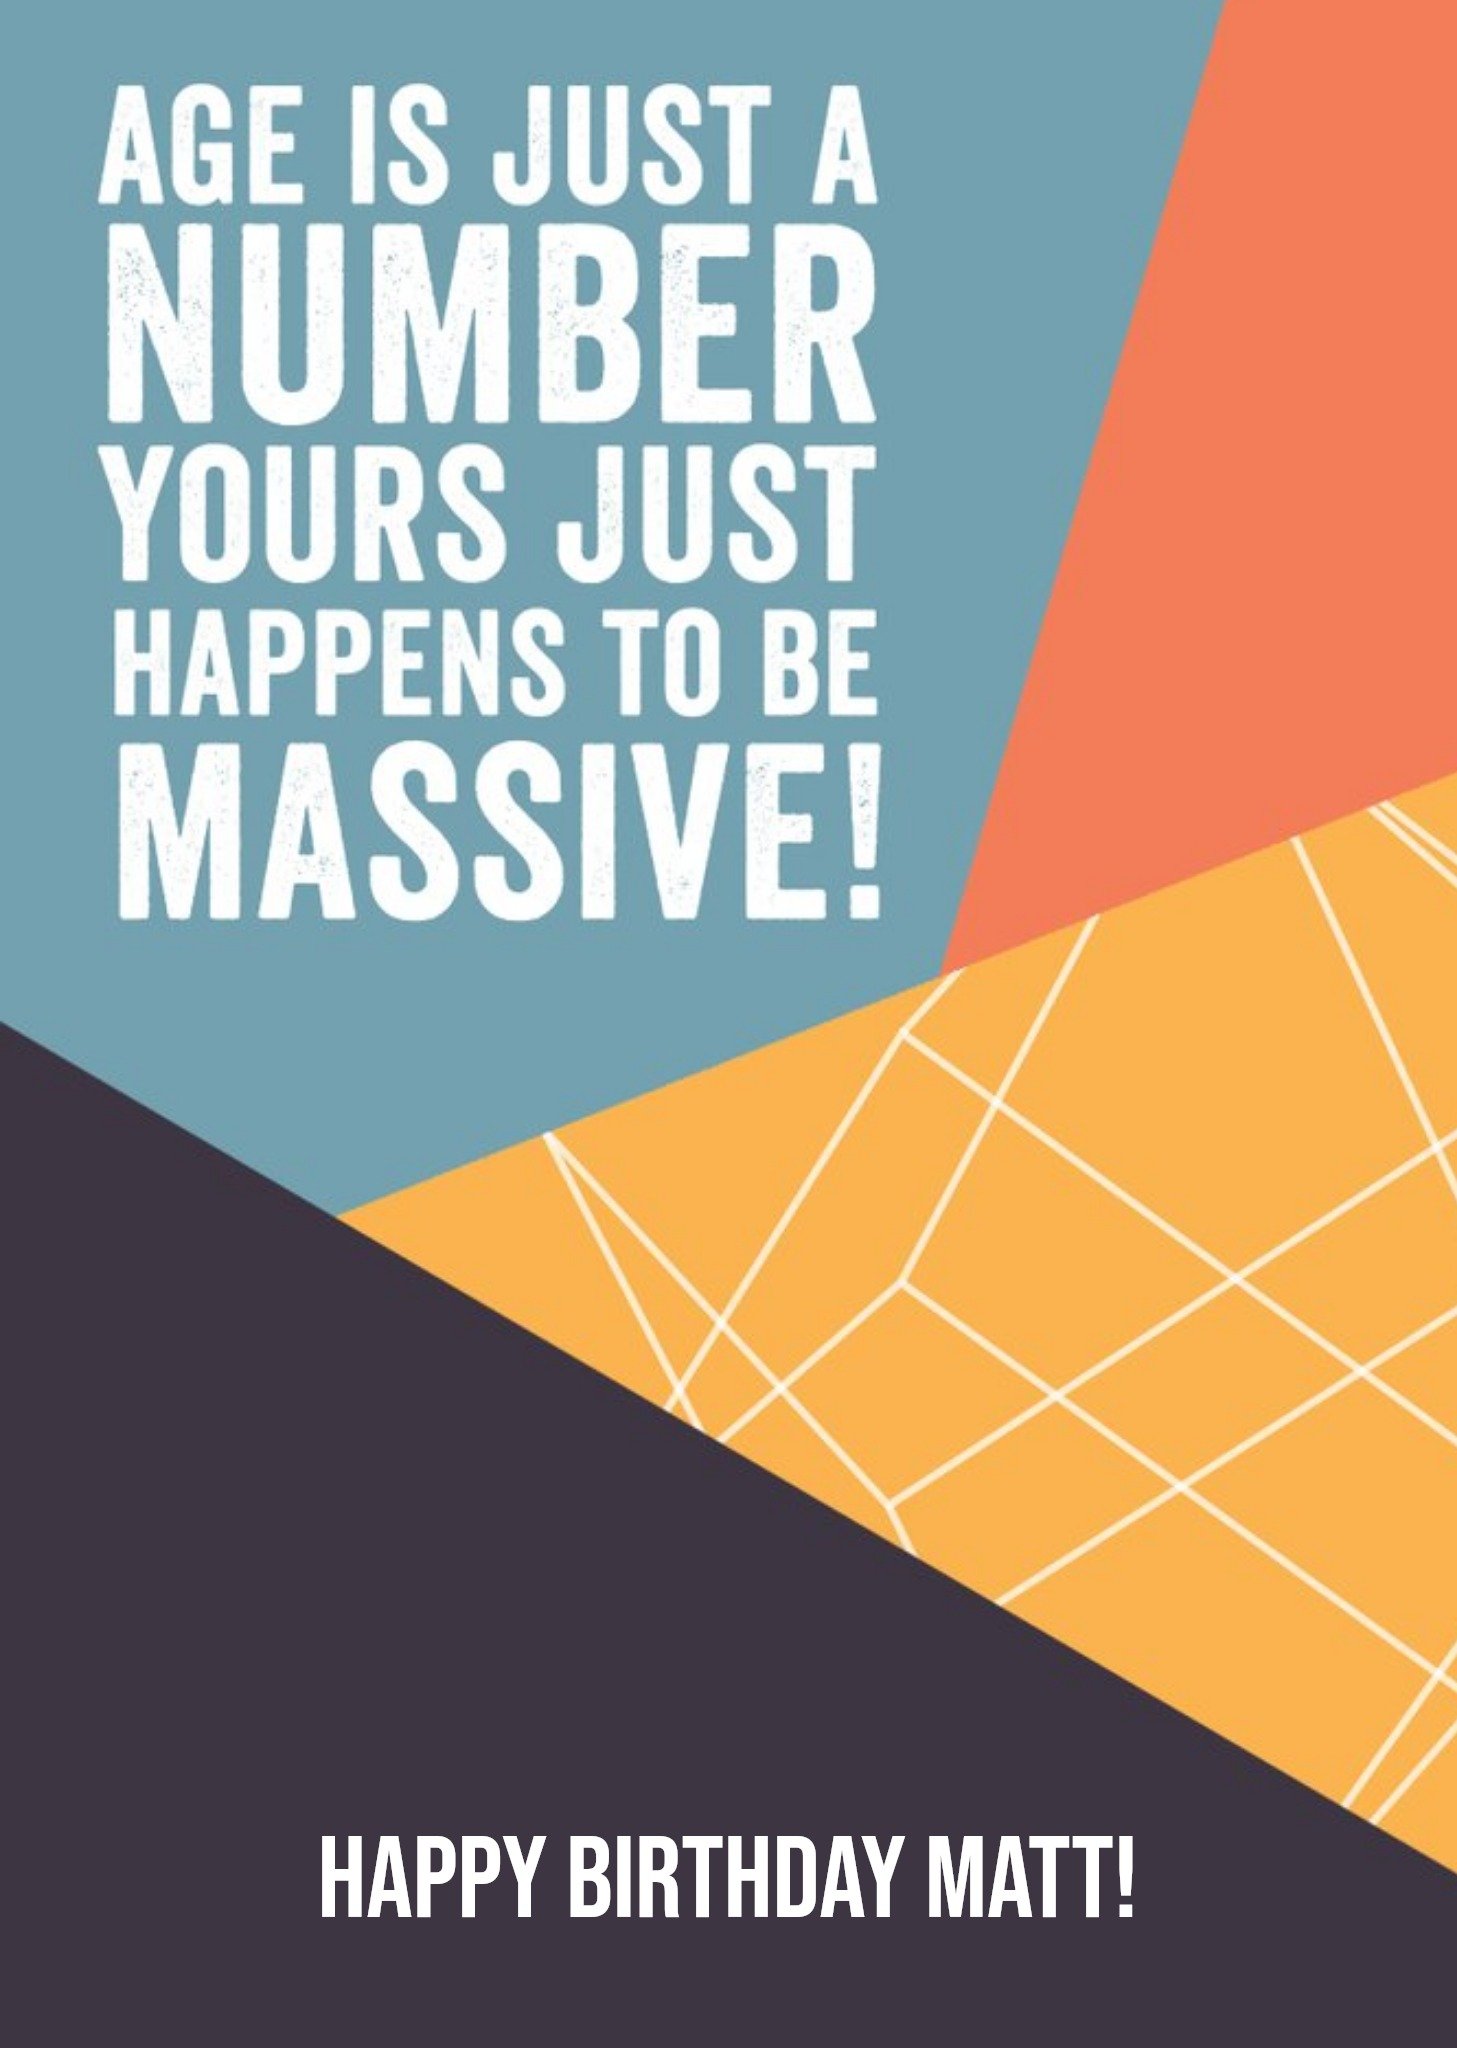 Moonpig Age Is Just A Number Yours Just Happens To Be Massive Retro Birthday Card Ecard